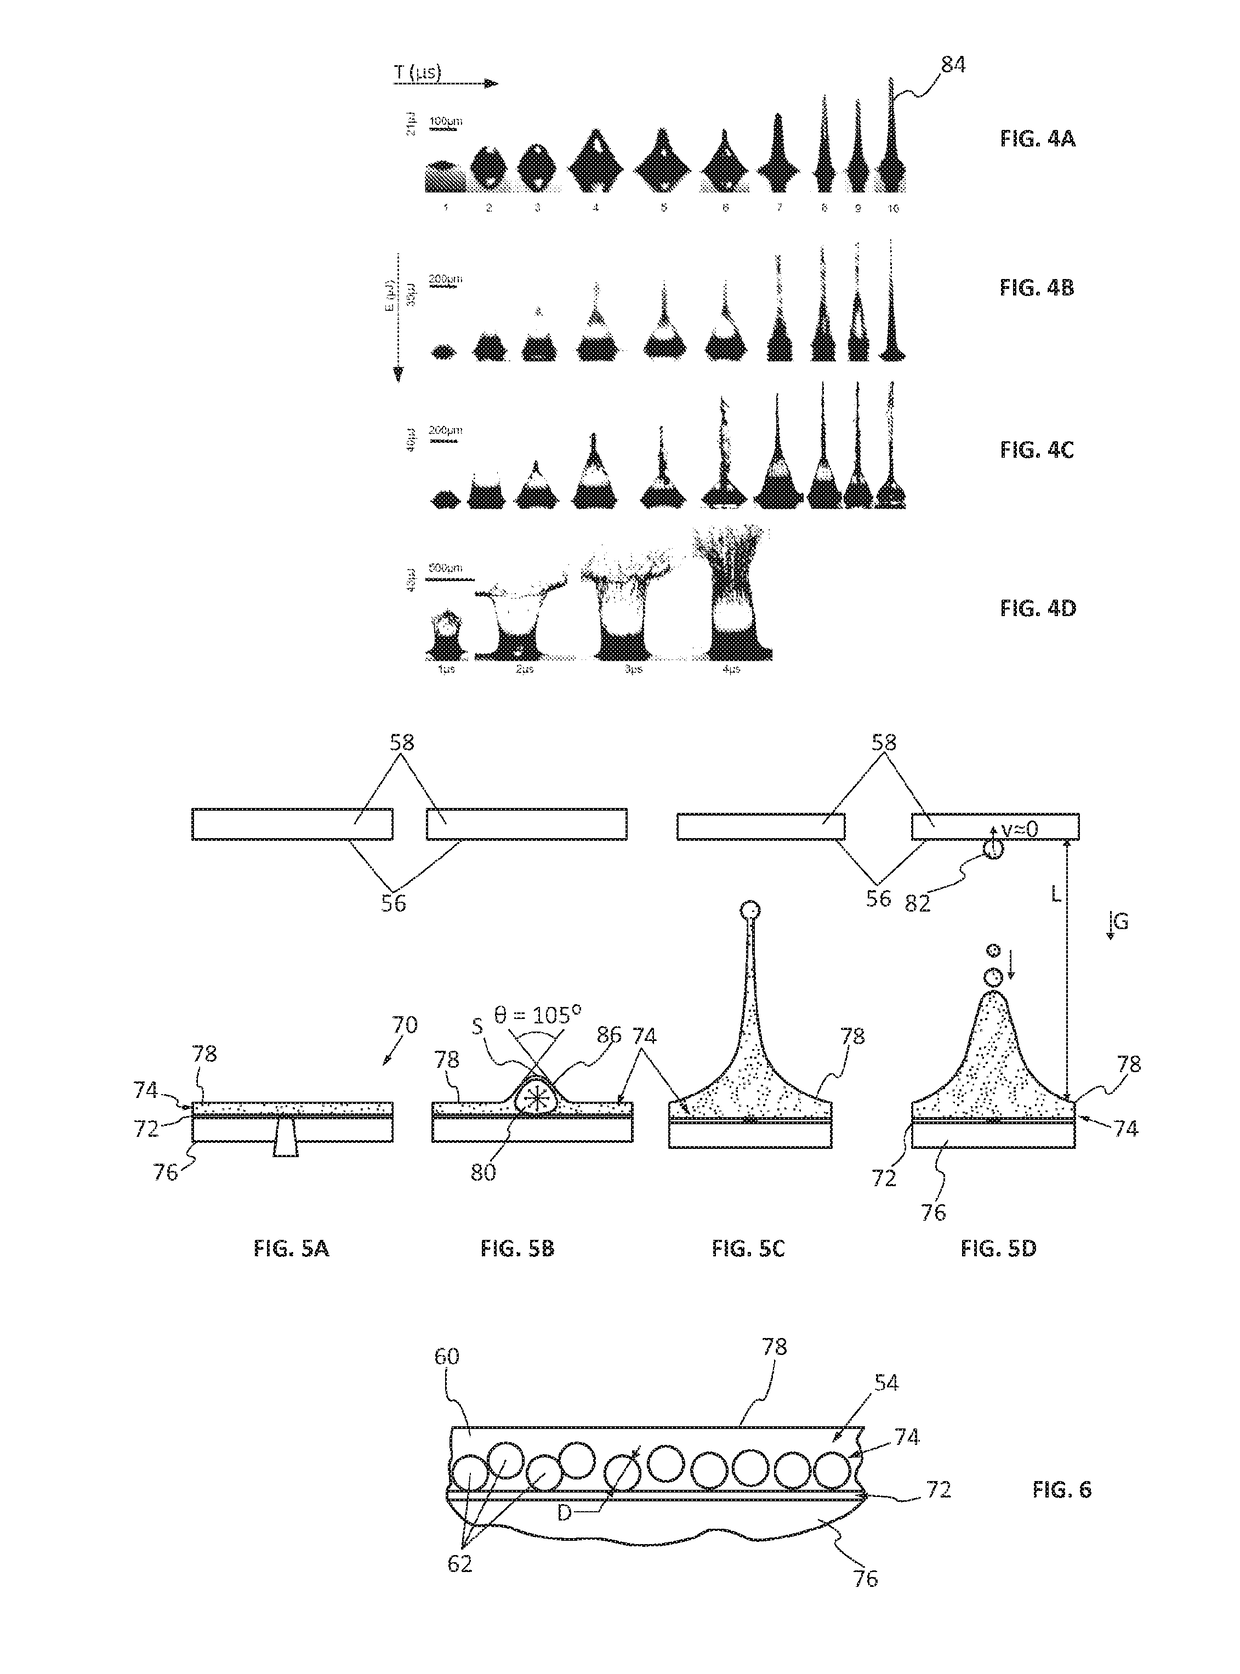 Method for laser printing biological components, and device for implementing said method